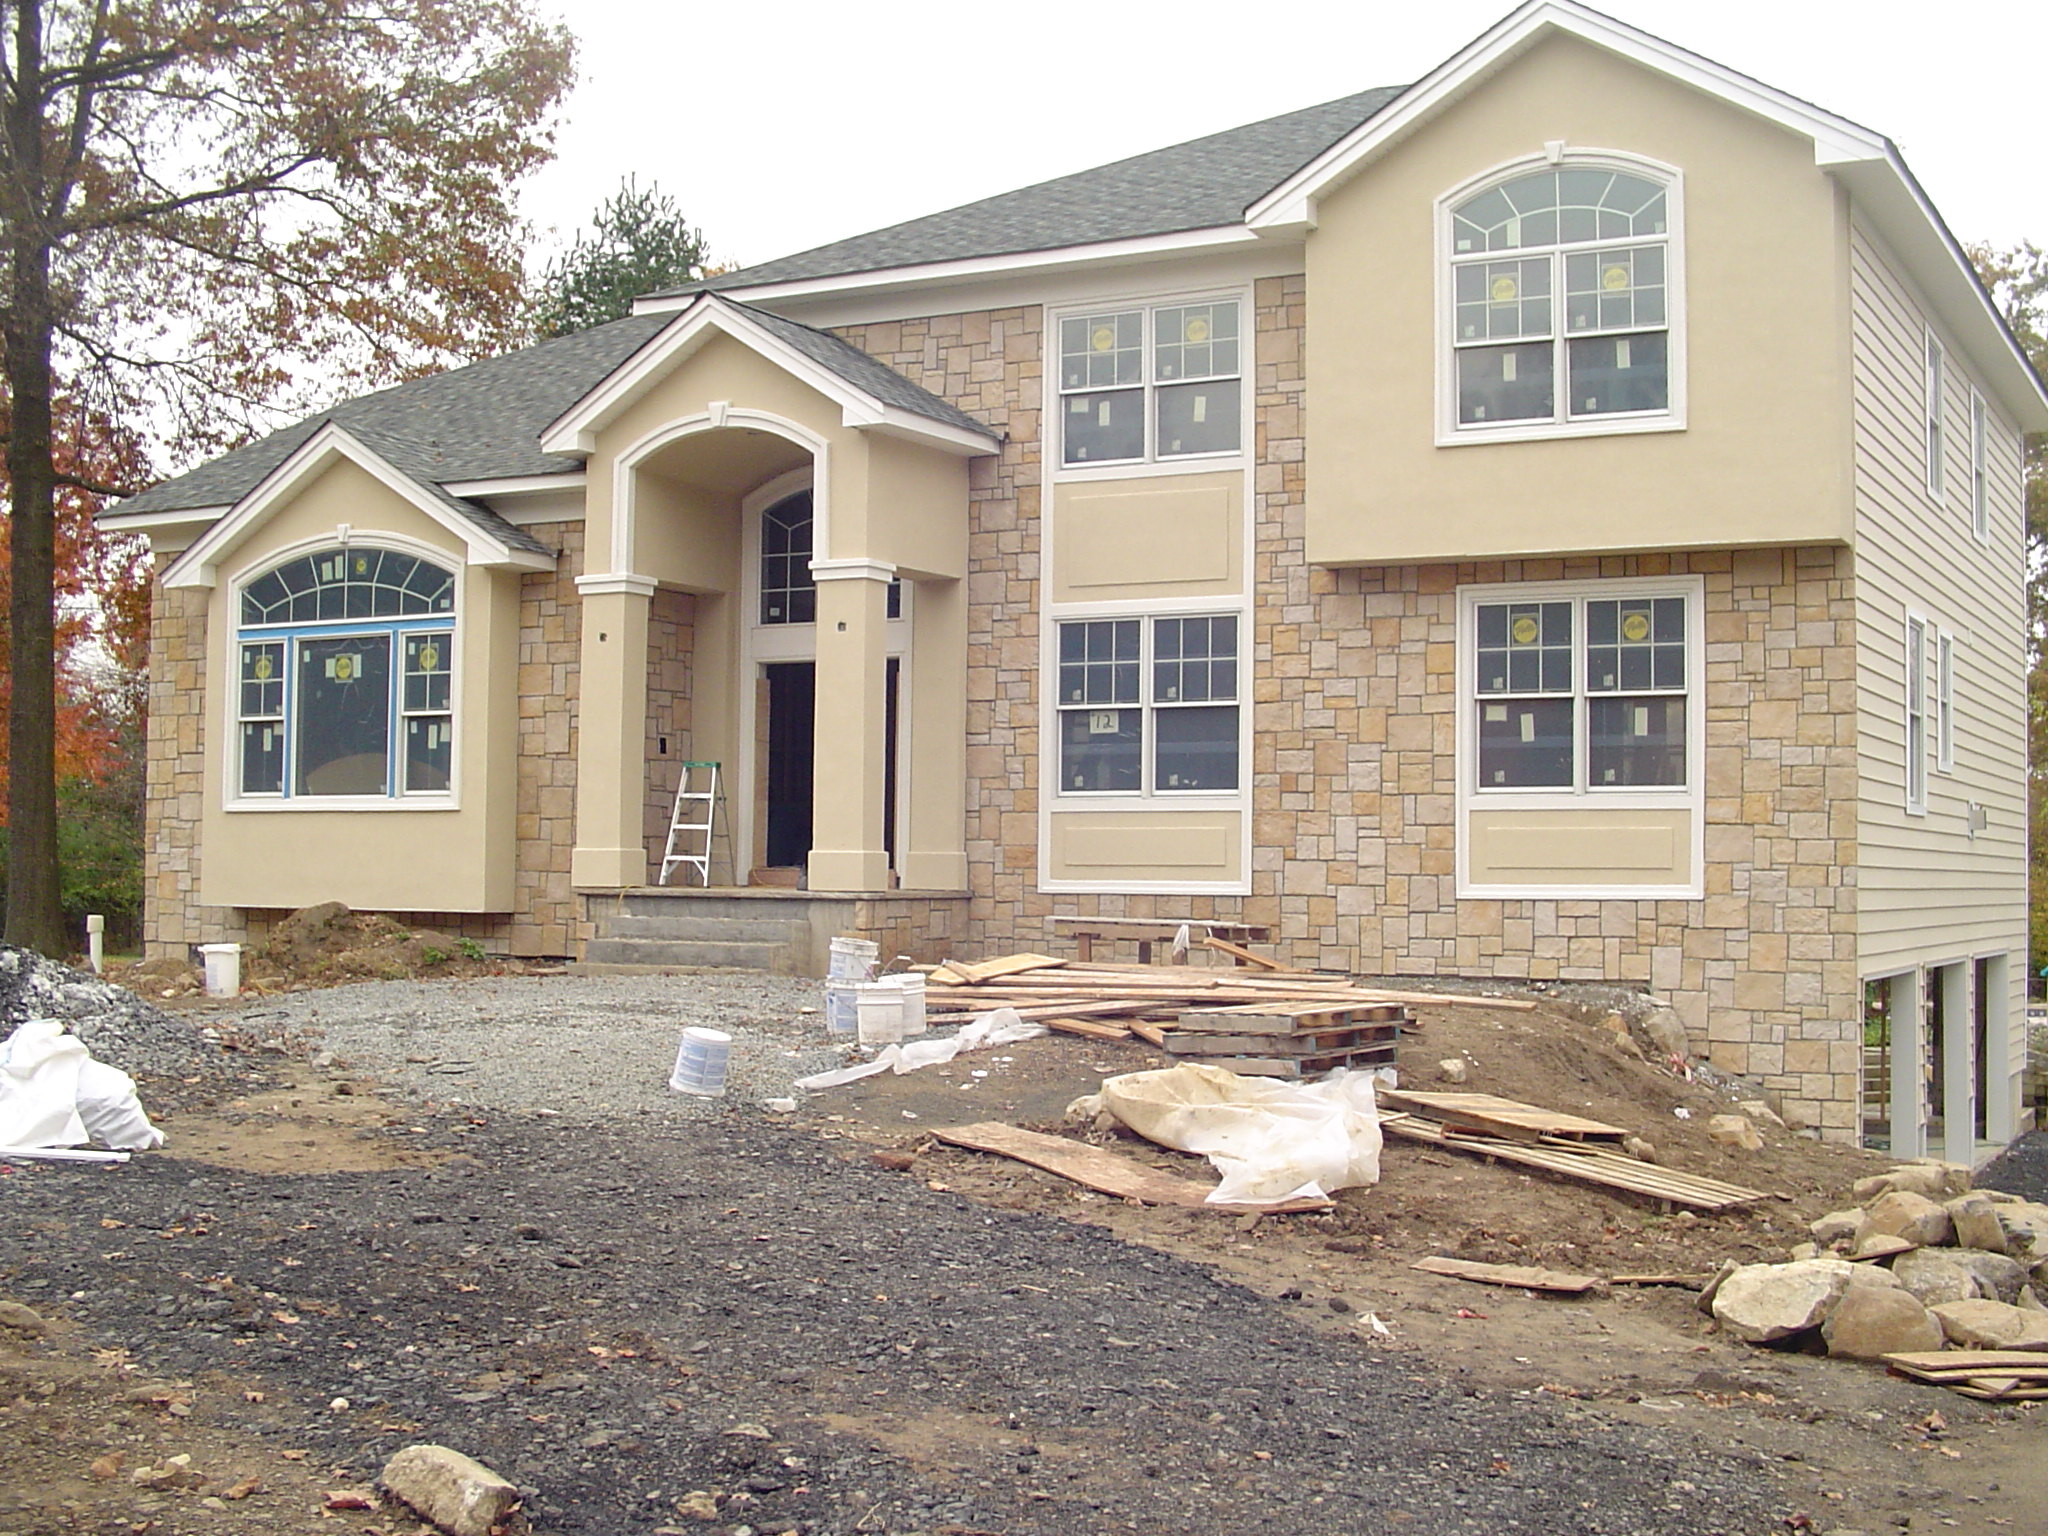 Custom home Essex County after completion of stucco front with stone and custom trim detail.